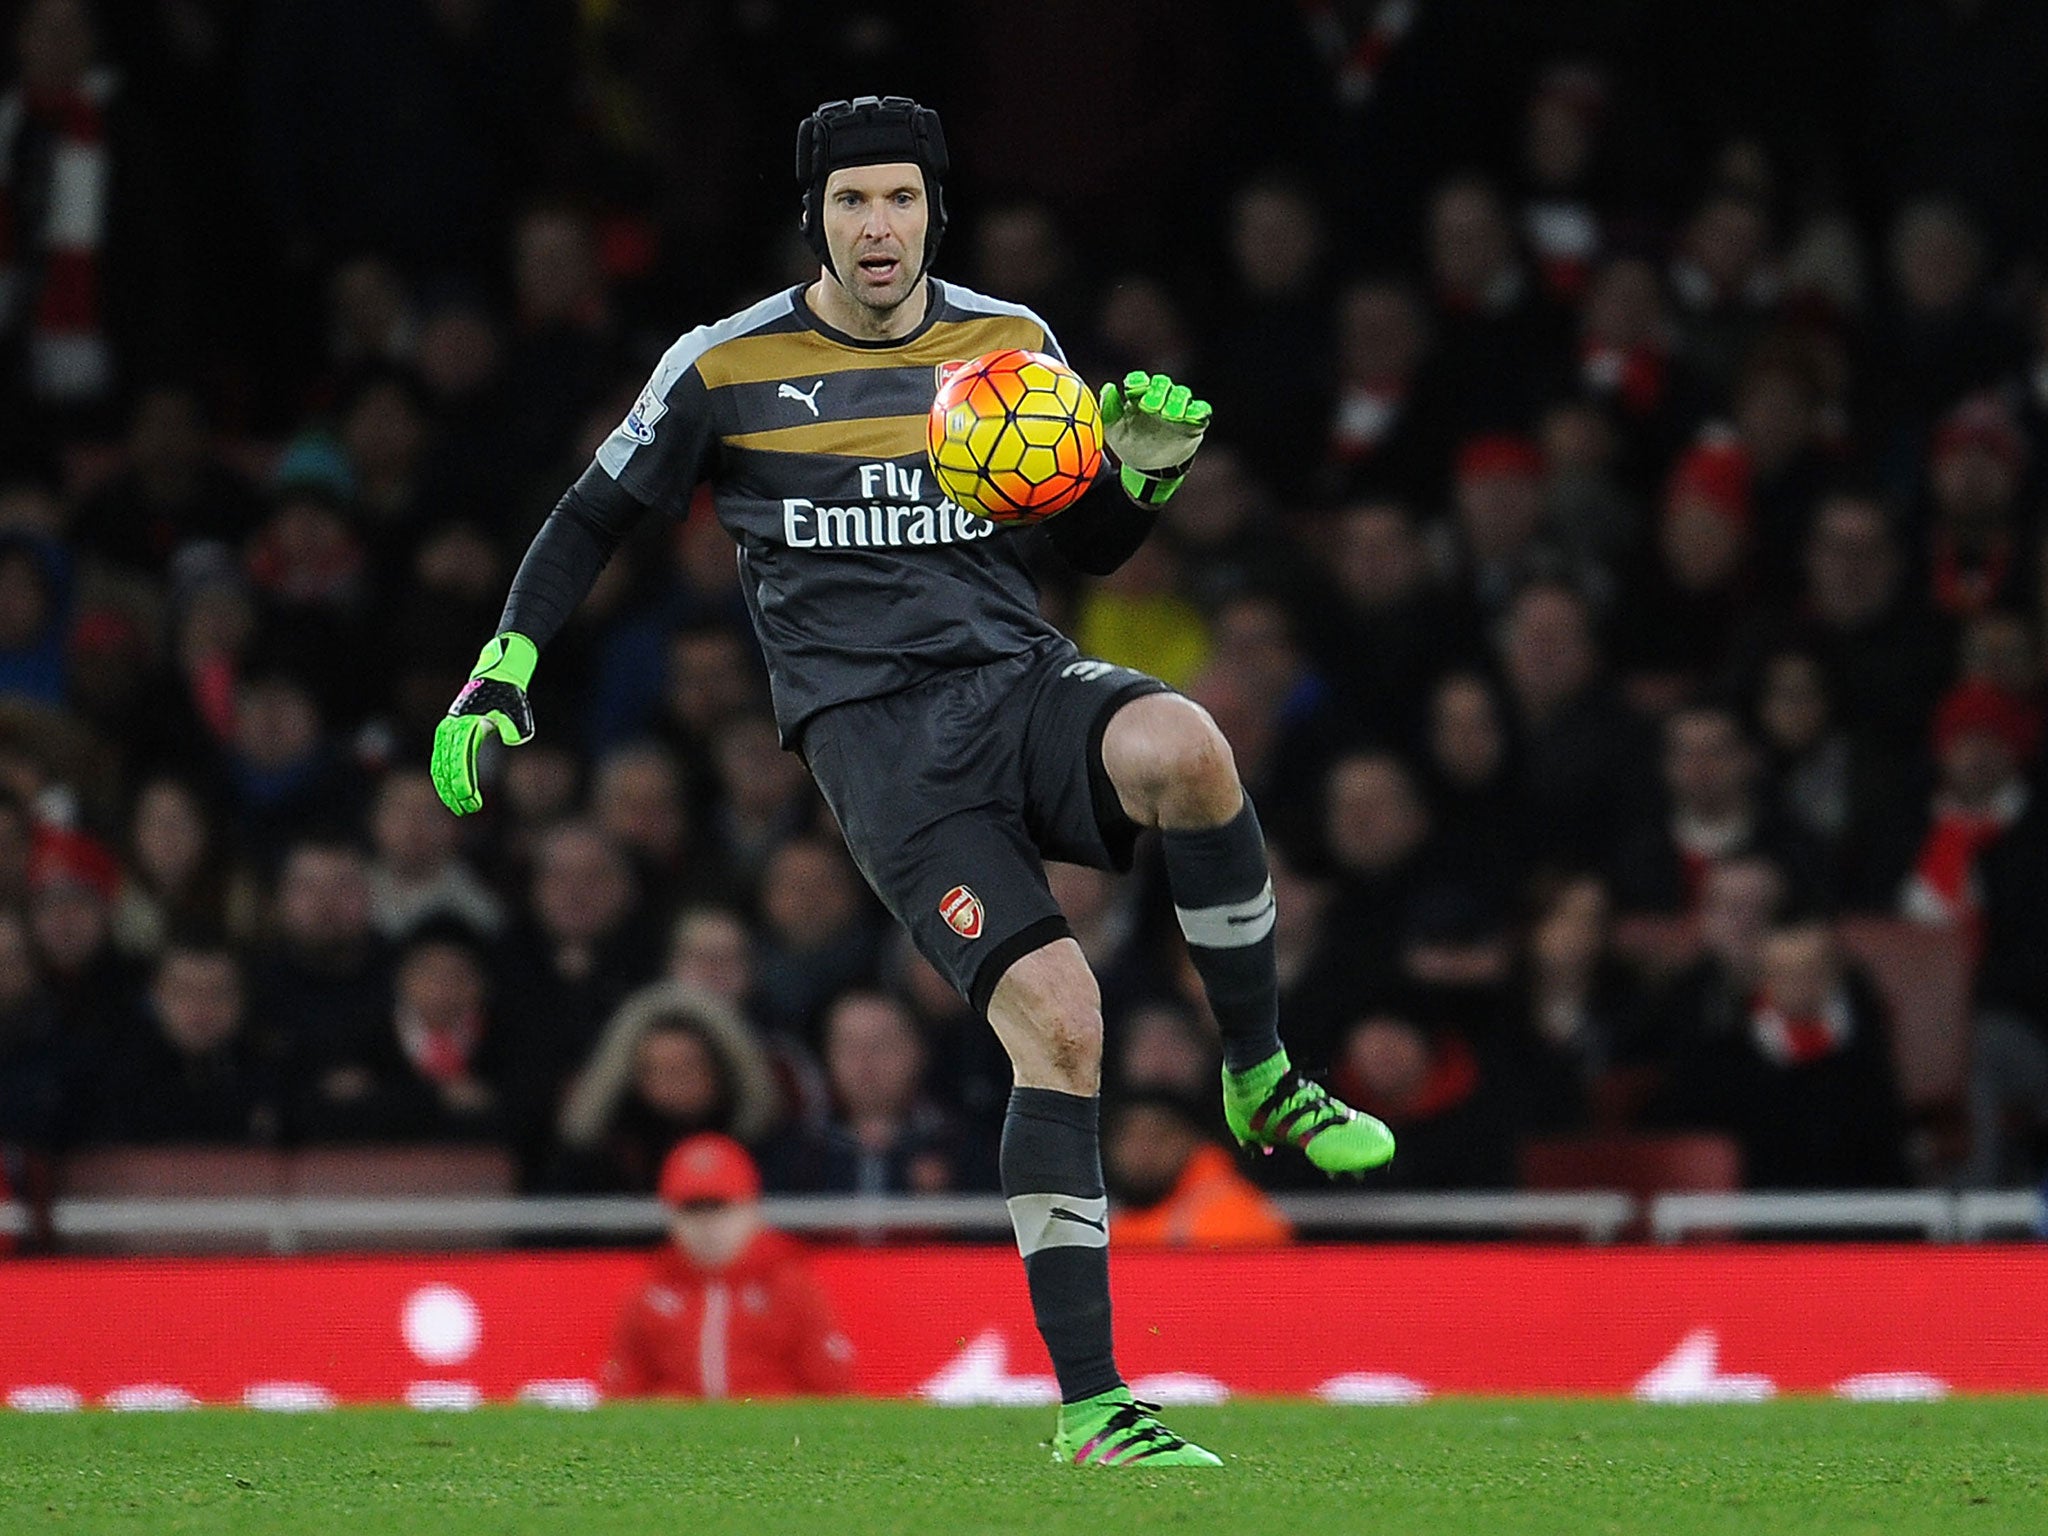 Arsenal goalkeeper Petr Cech in action during the 0-0 draw with Southampton